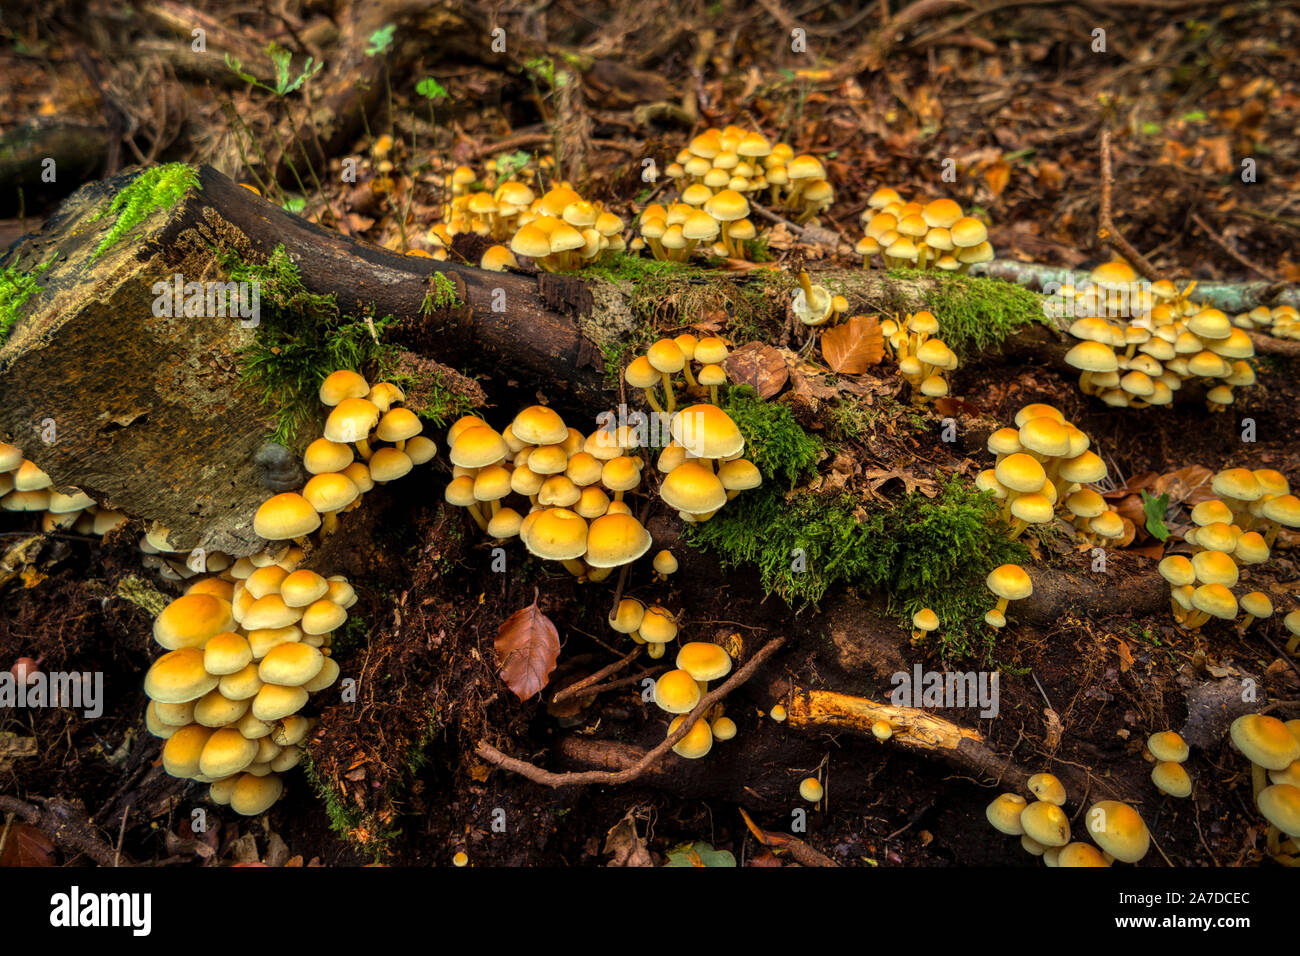 Tree mushrooms on a tree stump in the Darss forest Stock Photo